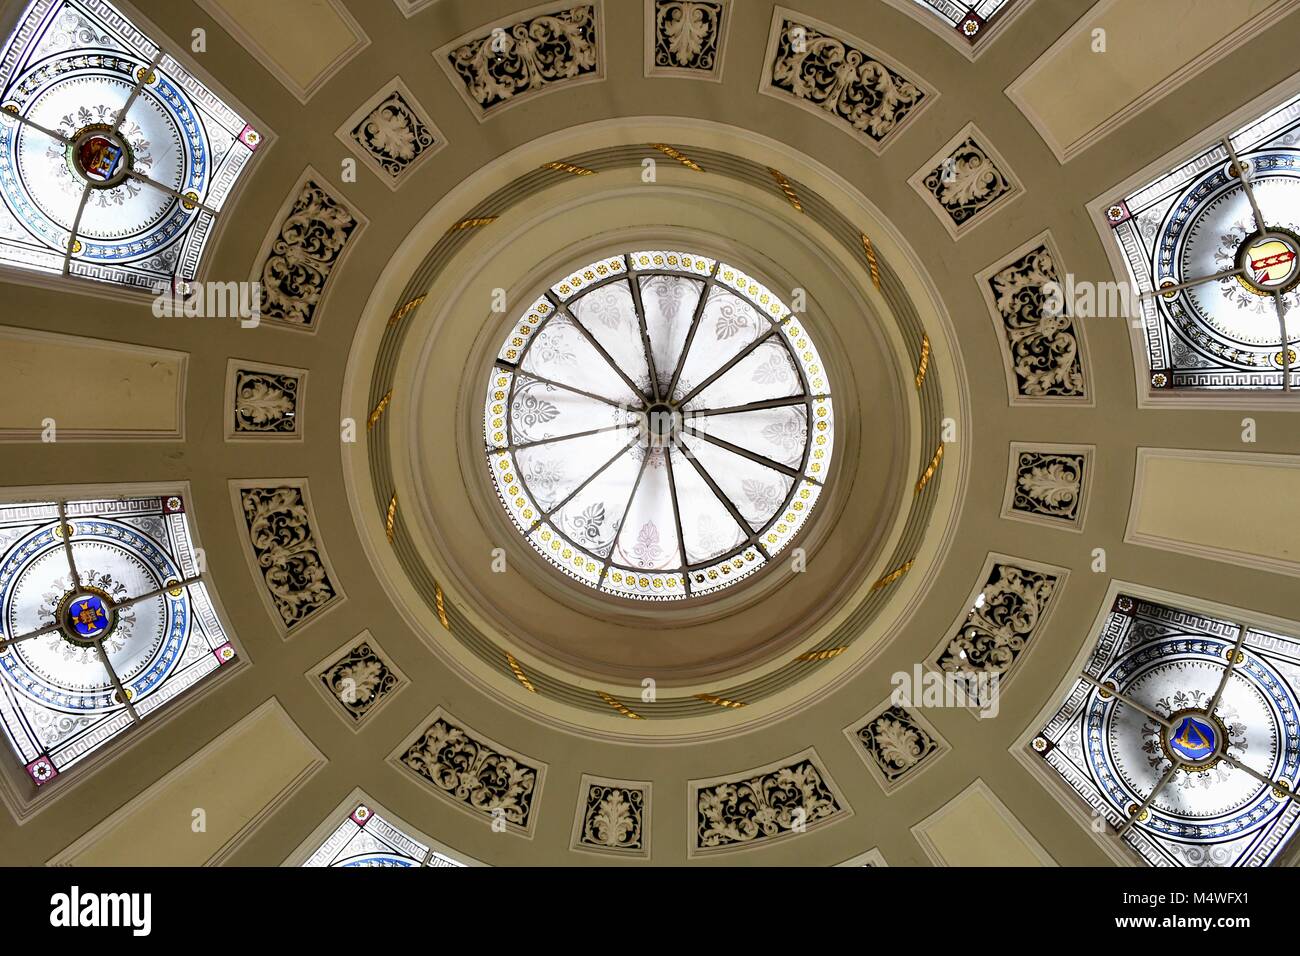 Ceiling dome in the Portico Library in Manchester Stock Photo